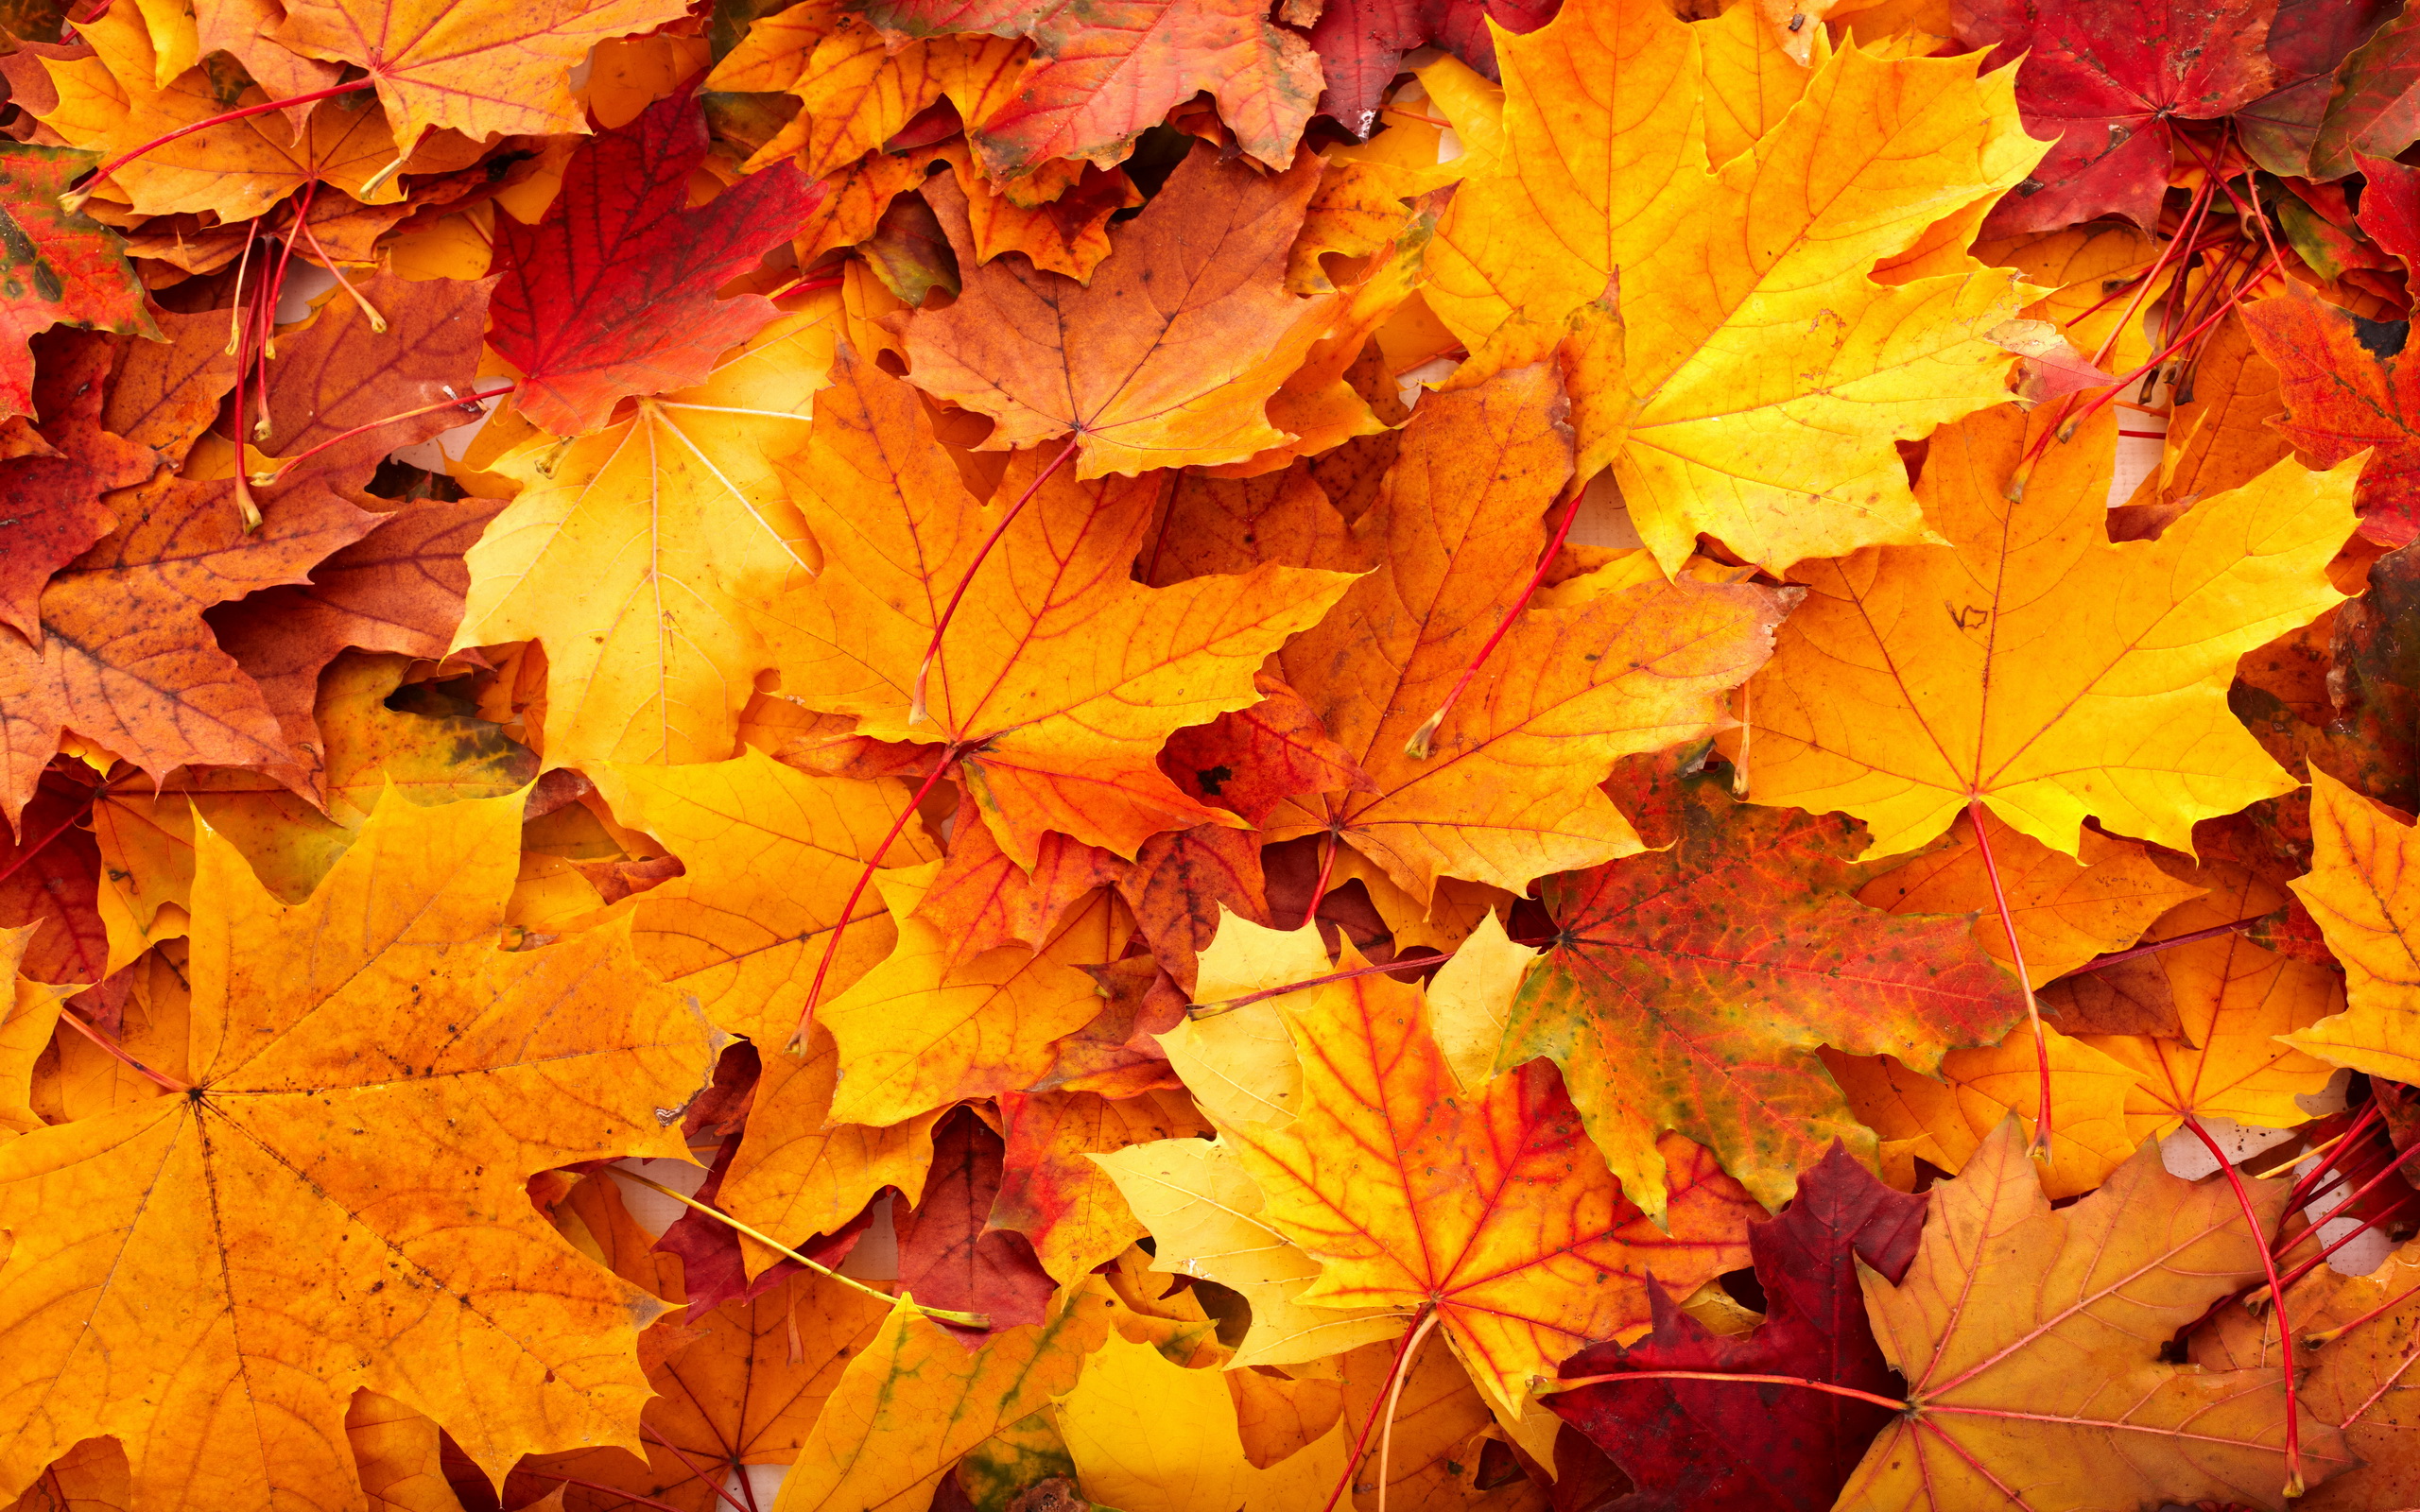 Fall background images that you can use in your designs